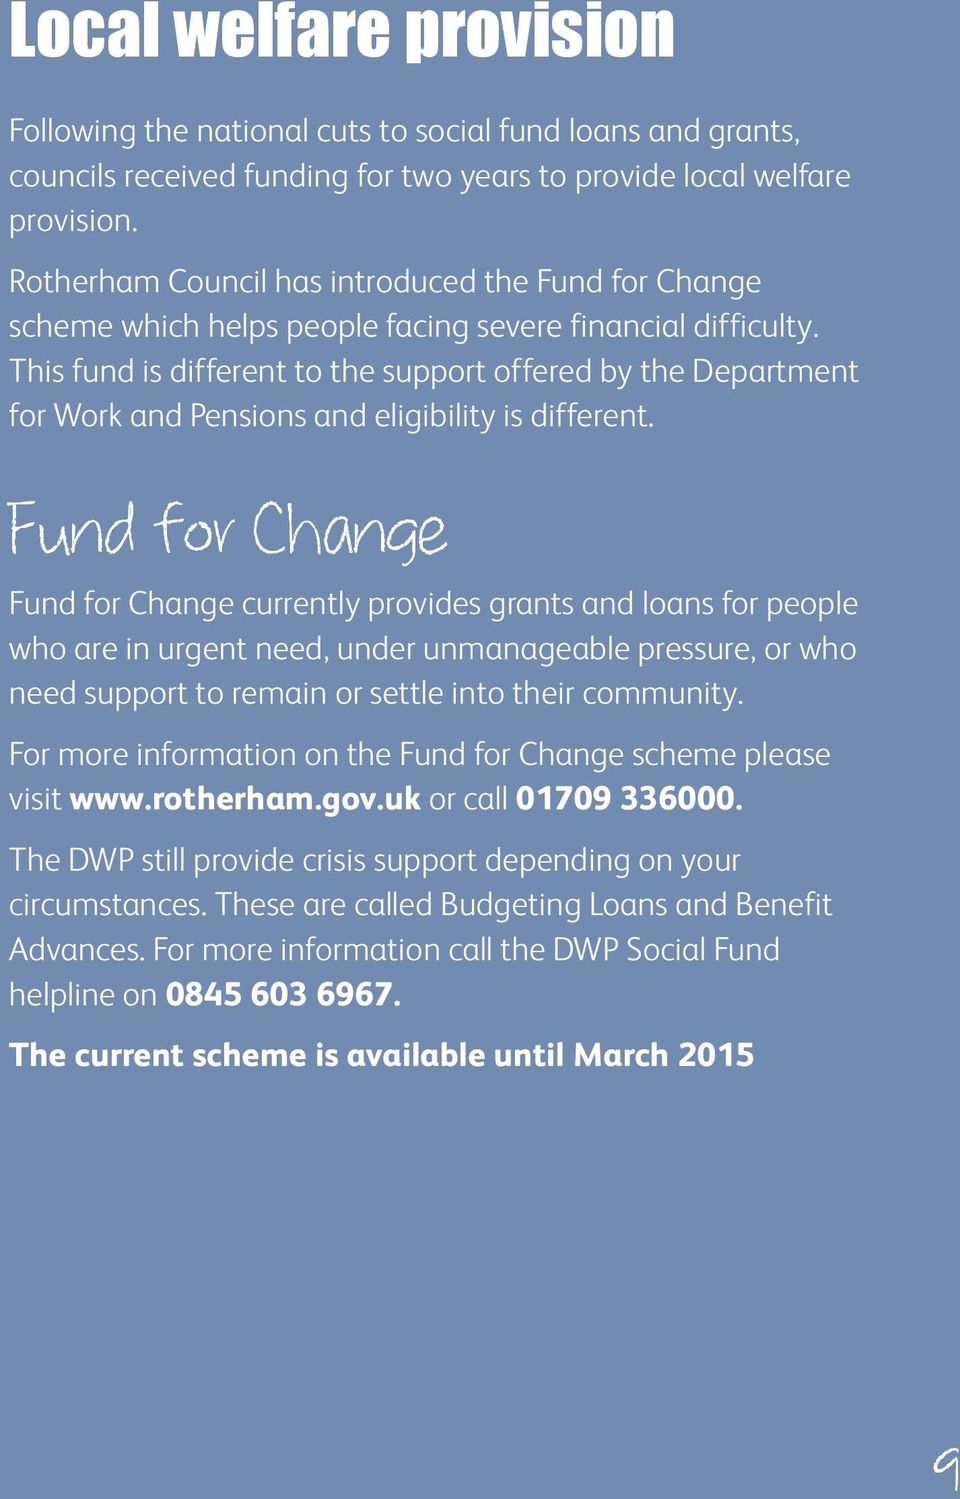 This fund is different to the support offered by the Department for Work and Pensions and eligibility is different.